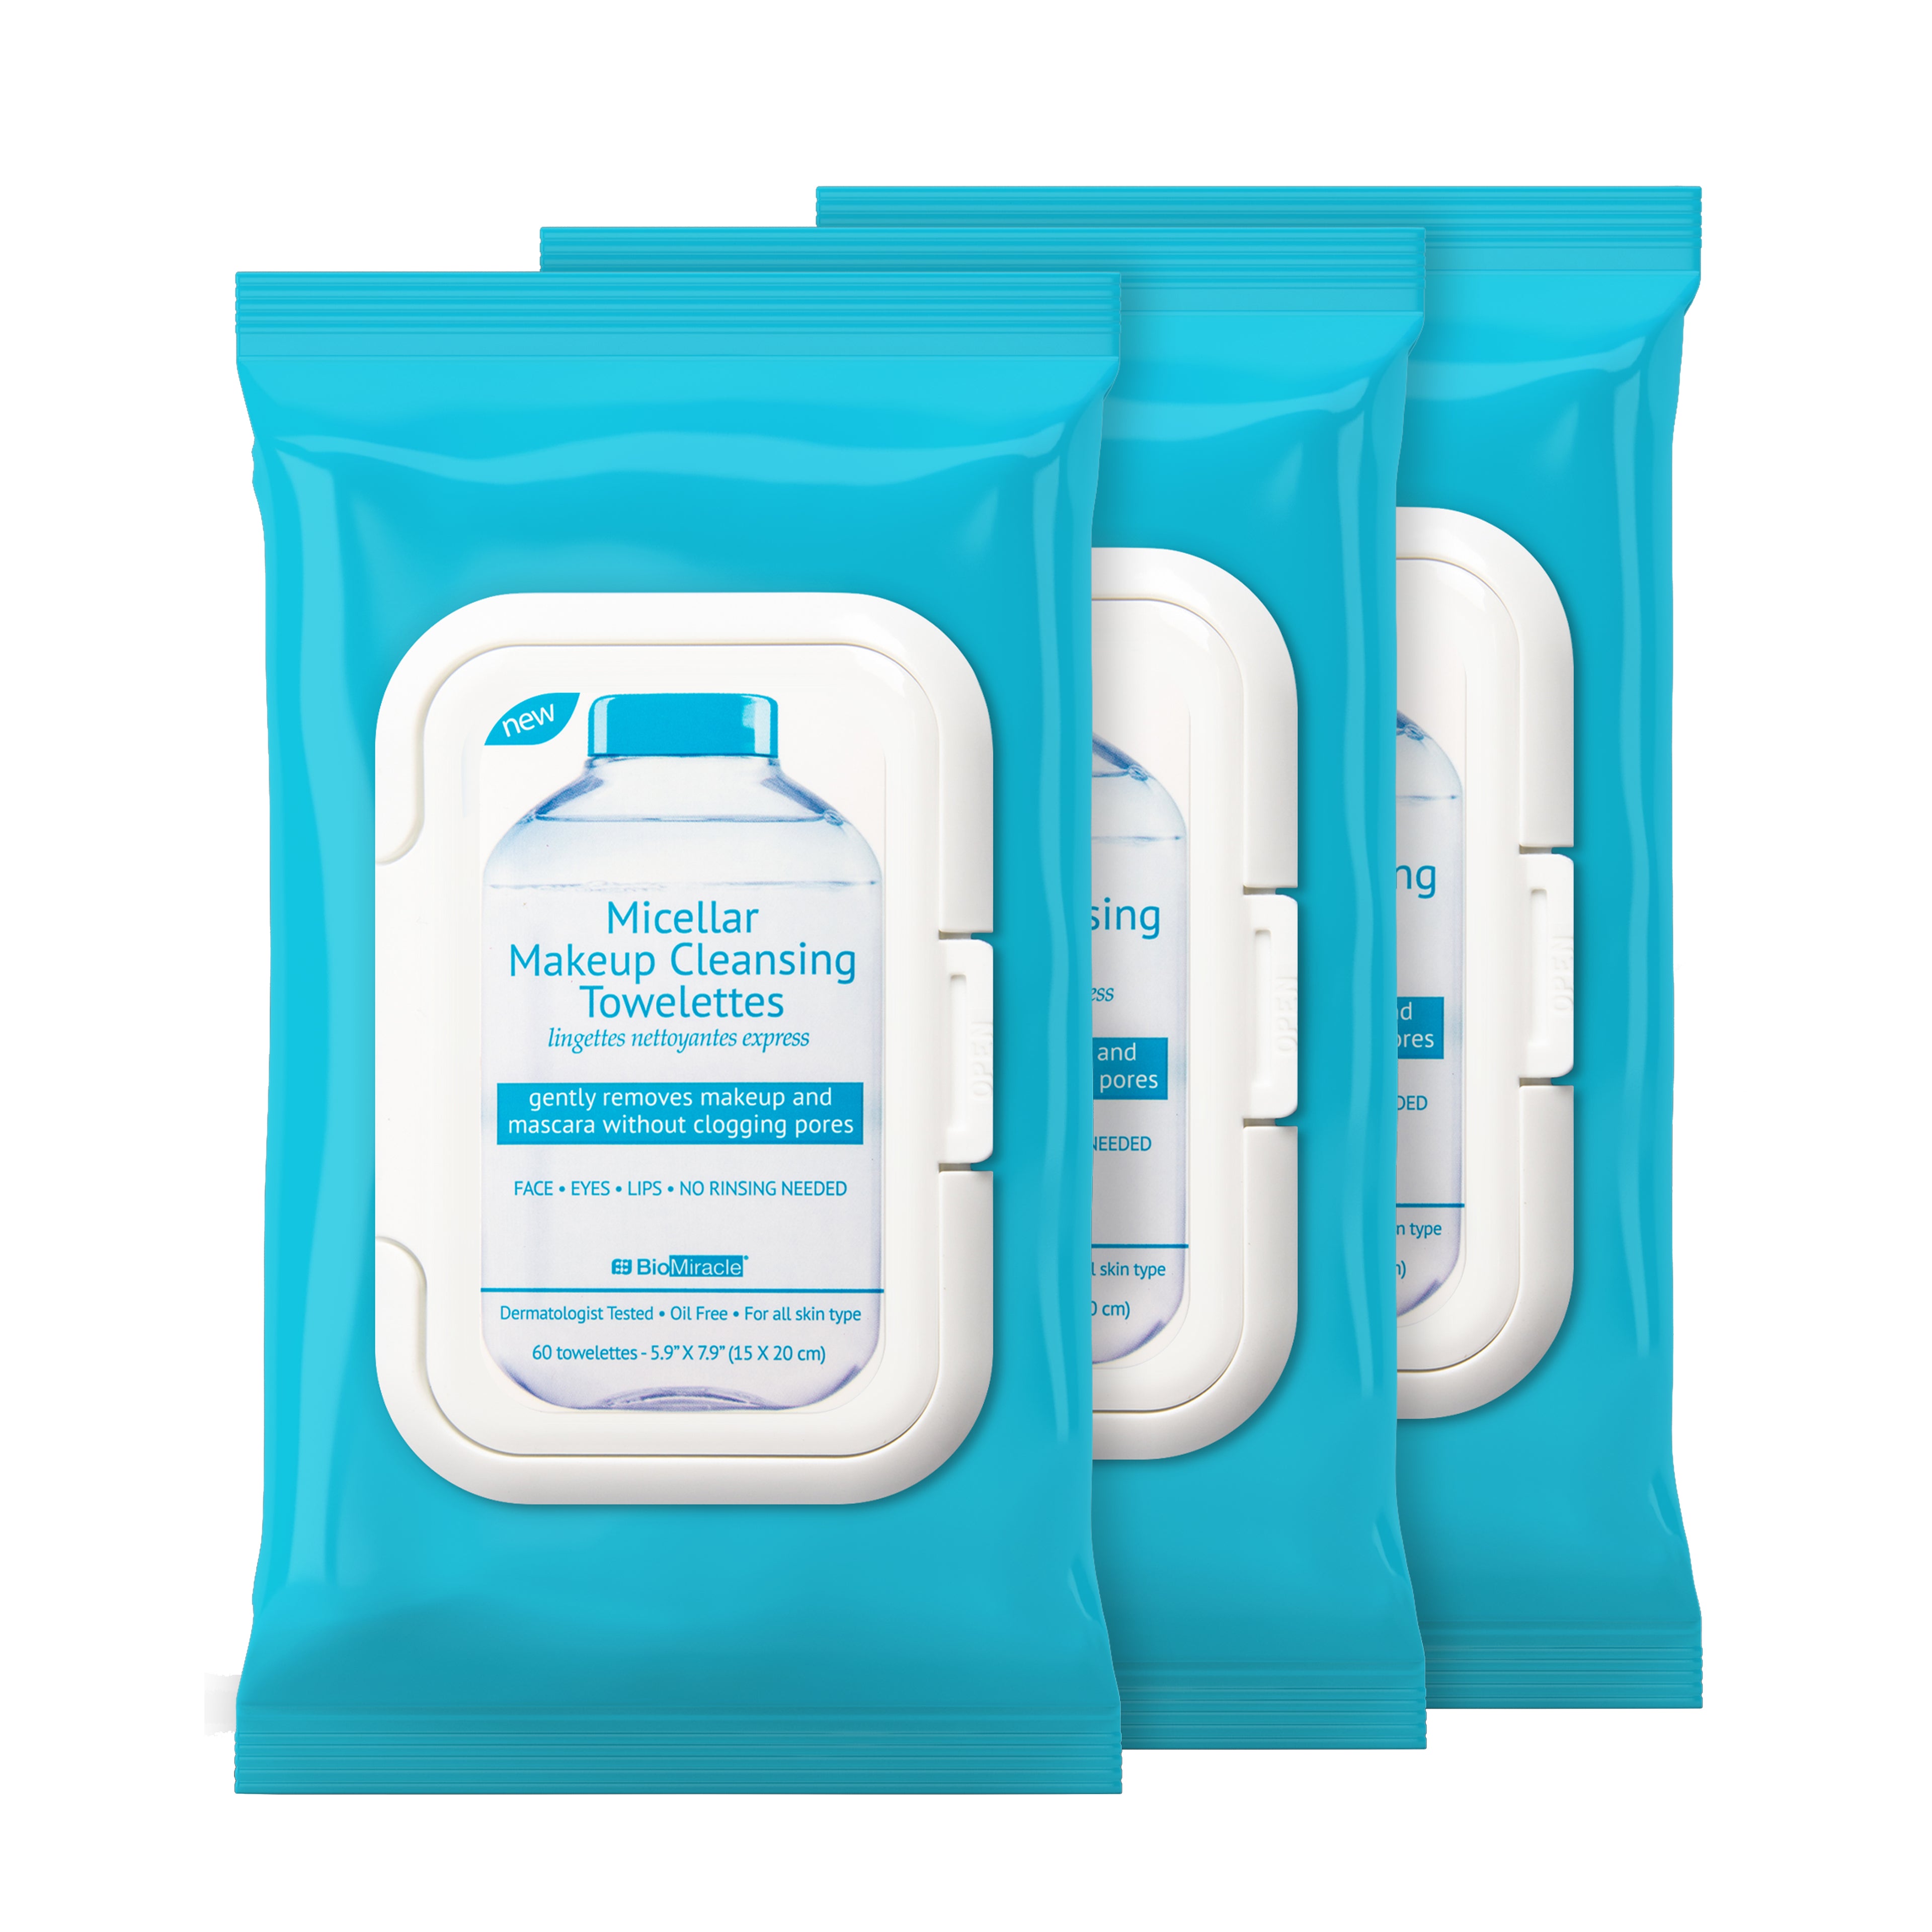 Micellar Makeup Cleansing Towelettes 3 Pack